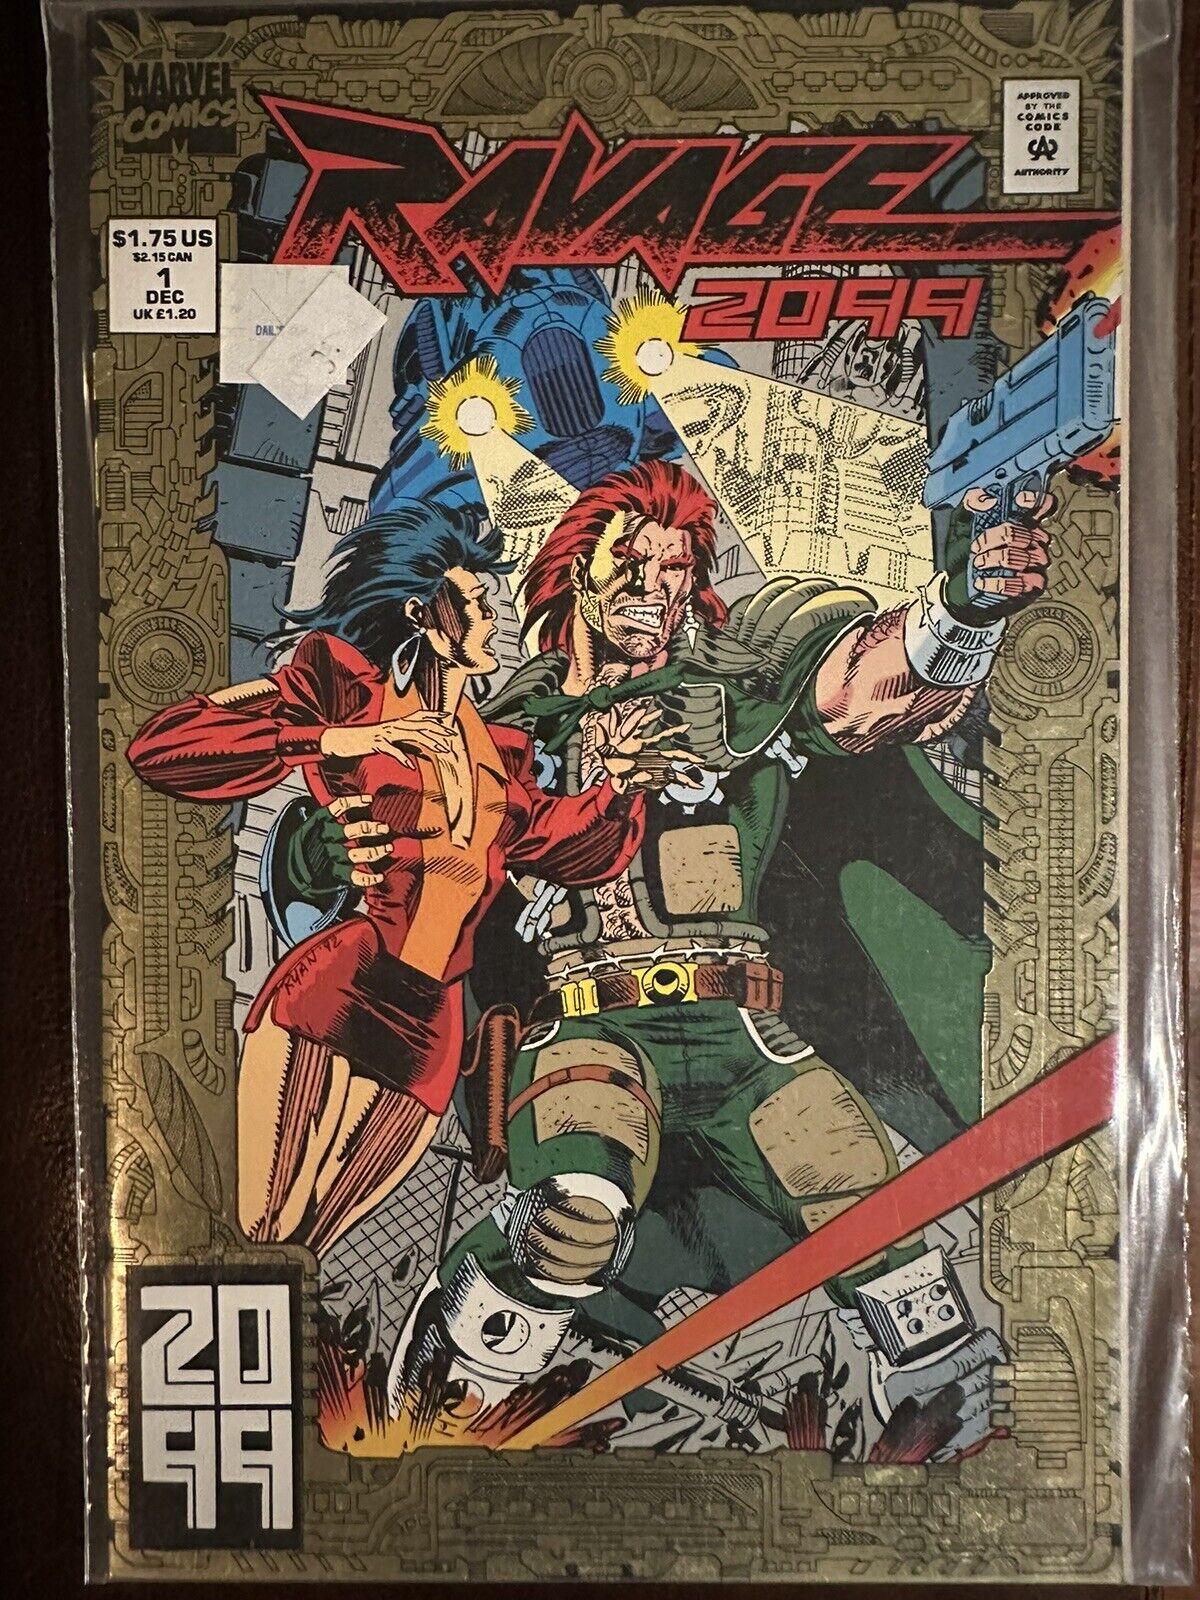 Ravage 2099 Comic #1, With Gold Foil Cover 